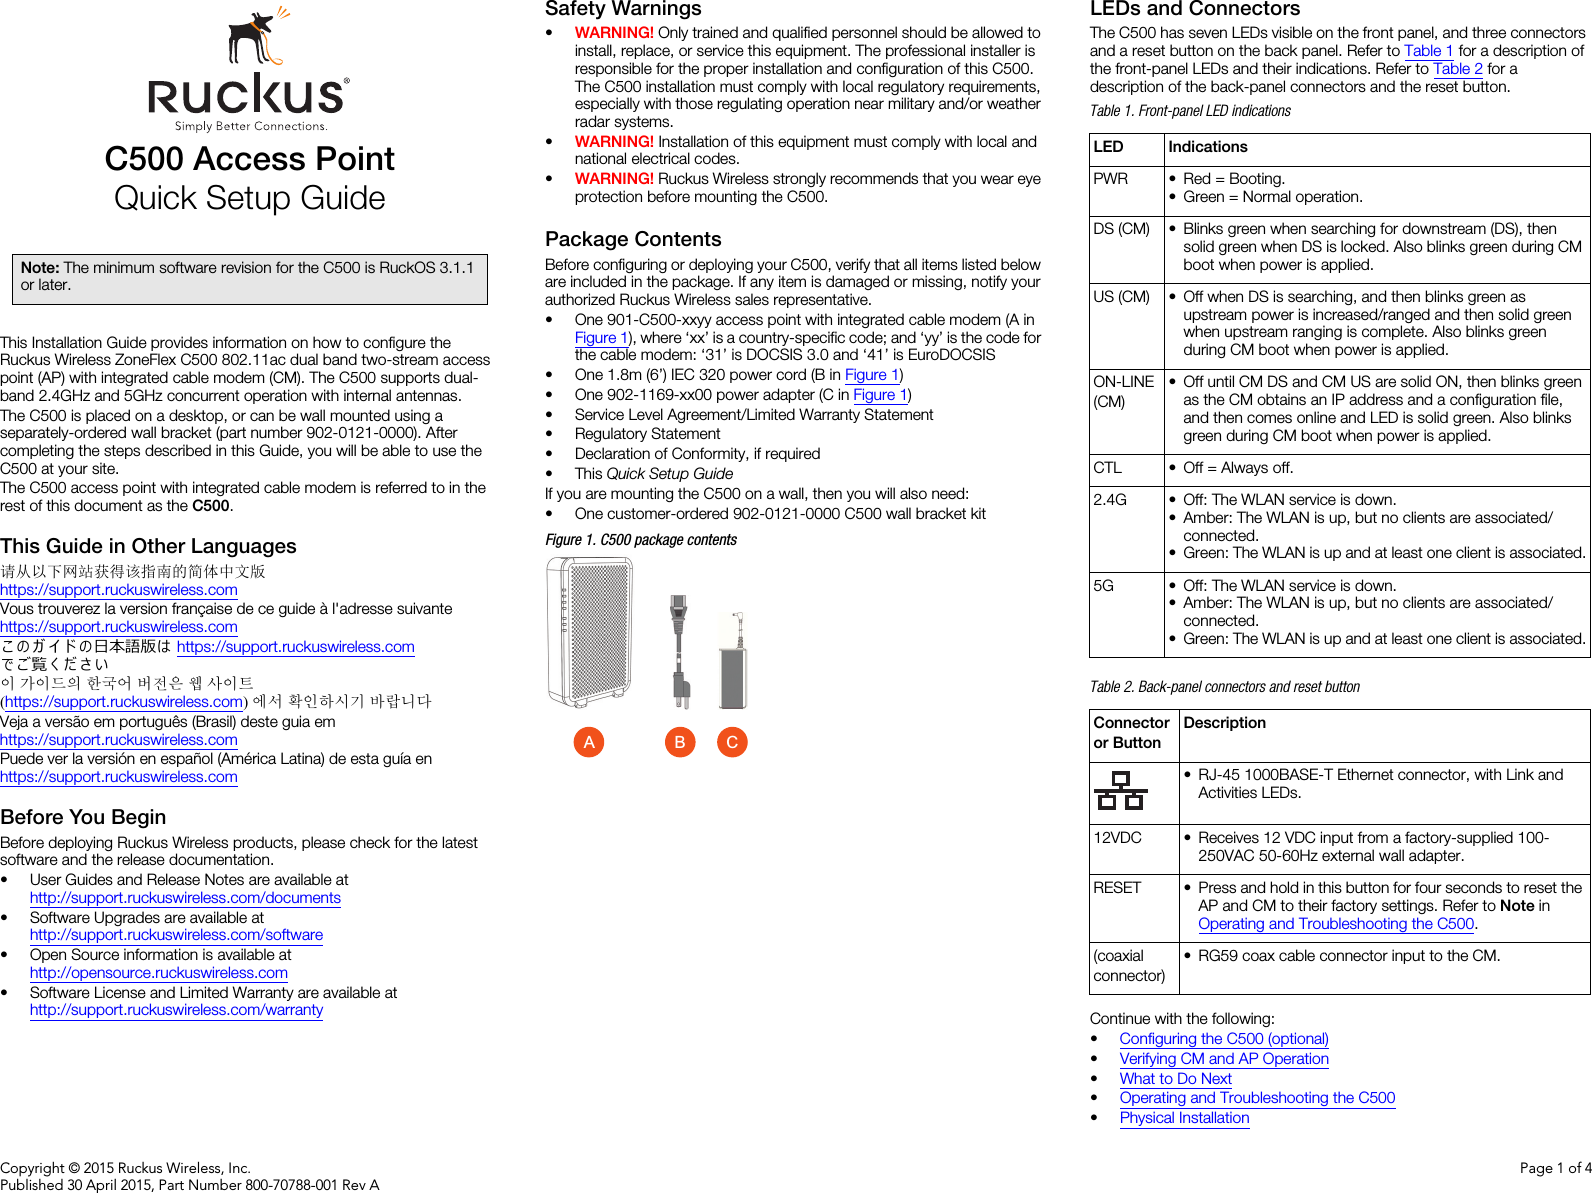 Copyright © 2015 Ruckus Wireless, Inc.Published 30 April 2015, Part Number 800-70788-001 Rev APage 1 of 4C500 Access PointQuick Setup GuideThis Installation Guide provides information on how to configure the Ruckus Wireless ZoneFlex C500 802.11ac dual band two-stream access point (AP) with integrated cable modem (CM). The C500 supports dual-band 2.4GHz and 5GHz concurrent operation with internal antennas. The C500 is placed on a desktop, or can be wall mounted using a separately-ordered wall bracket (part number 902-0121-0000). After completing the steps described in this Guide, you will be able to use the C500 at your site. The C500 access point with integrated cable modem is referred to in the rest of this document as the C500.This Guide in Other Languages请从以下网站获得该指南的简体中文版 https://support.ruckuswireless.comVous trouverez la version française de ce guide à l&apos;adresse suivante https://support.ruckuswireless.comこ の ガ イ ド の日本語版は https://support.ruckuswireless.com でご覧く ださい이 가이드의 한국어 버전은 웹 사이트(https://support.ruckuswireless.com)에서 확인하시기 바랍니다Veja a versão em português (Brasil) deste guia em https://support.ruckuswireless.comPuede ver la versión en español (América Latina) de esta guía en https://support.ruckuswireless.comBefore You BeginBefore deploying Ruckus Wireless products, please check for the latest software and the release documentation.• User Guides and Release Notes are available at http://support.ruckuswireless.com/documents• Software Upgrades are available athttp://support.ruckuswireless.com/software• Open Source information is available athttp://opensource.ruckuswireless.com• Software License and Limited Warranty are available at http://support.ruckuswireless.com/warrantySafety Warnings•WARNING! Only trained and qualified personnel should be allowed to install, replace, or service this equipment. The professional installer is responsible for the proper installation and configuration of this C500. The C500 installation must comply with local regulatory requirements, especially with those regulating operation near military and/or weather radar systems. •WARNING! Installation of this equipment must comply with local and national electrical codes. •WARNING! Ruckus Wireless strongly recommends that you wear eye protection before mounting the C500.Package ContentsBefore configuring or deploying your C500, verify that all items listed below are included in the package. If any item is damaged or missing, notify your authorized Ruckus Wireless sales representative. • One 901-C500-xxyy access point with integrated cable modem (A in Figure 1), where ‘xx’ is a country-specific code; and ‘yy’ is the code for the cable modem: ‘31’ is DOCSIS 3.0 and ‘41’ is EuroDOCSIS• One 1.8m (6’) IEC 320 power cord (B in Figure 1)• One 902-1169-xx00 power adapter (C in Figure 1)• Service Level Agreement/Limited Warranty Statement• Regulatory Statement• Declaration of Conformity, if required• This Quick Setup GuideIf you are mounting the C500 on a wall, then you will also need:• One customer-ordered 902-0121-0000 C500 wall bracket kitFigure 1. C500 package contentsLEDs and ConnectorsThe C500 has seven LEDs visible on the front panel, and three connectors and a reset button on the back panel. Refer to Table 1 for a description of the front-panel LEDs and their indications. Refer to Table 2 for a description of the back-panel connectors and the reset button.Continue with the following:•Configuring the C500 (optional)•Verifying CM and AP Operation•What to Do Next•Operating and Troubleshooting the C500•Physical InstallationNote: The minimum software revision for the C500 is RuckOS 3.1.1 or later. ACBTable 1. Front-panel LED indicationsLED IndicationsPWR • Red = Booting.• Green = Normal operation.DS (CM) • Blinks green when searching for downstream (DS), then solid green when DS is locked. Also blinks green during CM boot when power is applied.US (CM) • Off when DS is searching, and then blinks green as upstream power is increased/ranged and then solid green when upstream ranging is complete. Also blinks green during CM boot when power is applied.ON-LINE (CM)• Off until CM DS and CM US are solid ON, then blinks green as the CM obtains an IP address and a configuration file, and then comes online and LED is solid green. Also blinks green during CM boot when power is applied.CTL • Off = Always off.2.4G • Off: The WLAN service is down.• Amber: The WLAN is up, but no clients are associated/connected.• Green: The WLAN is up and at least one client is associated.5G • Off: The WLAN service is down.• Amber: The WLAN is up, but no clients are associated/connected.• Green: The WLAN is up and at least one client is associated.Table 2. Back-panel connectors and reset buttonConnector or ButtonDescription• RJ-45 1000BASE-T Ethernet connector, with Link and Activities LEDs.12VDC • Receives 12 VDC input from a factory-supplied 100-250VAC 50-60Hz external wall adapter.RESET • Press and hold in this button for four seconds to reset the AP and CM to their factory settings. Refer to Note in Operating and Troubleshooting the C500.(coaxial connector)• RG59 coax cable connector input to the CM.